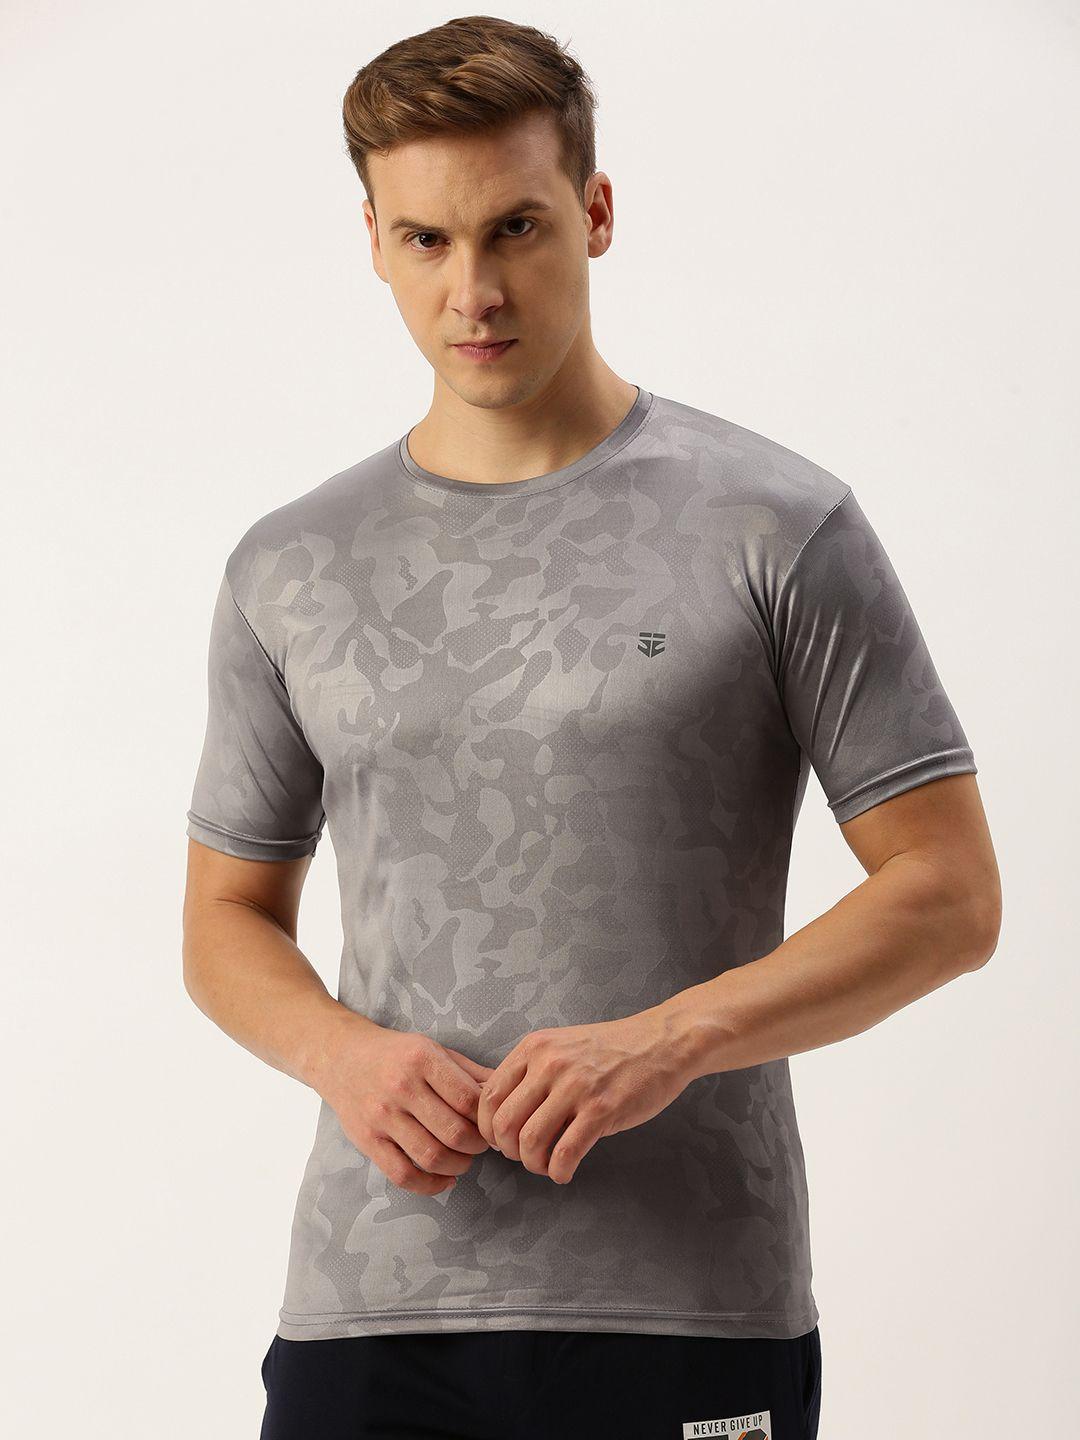 sports52 wear printed dry fit training t-shirt